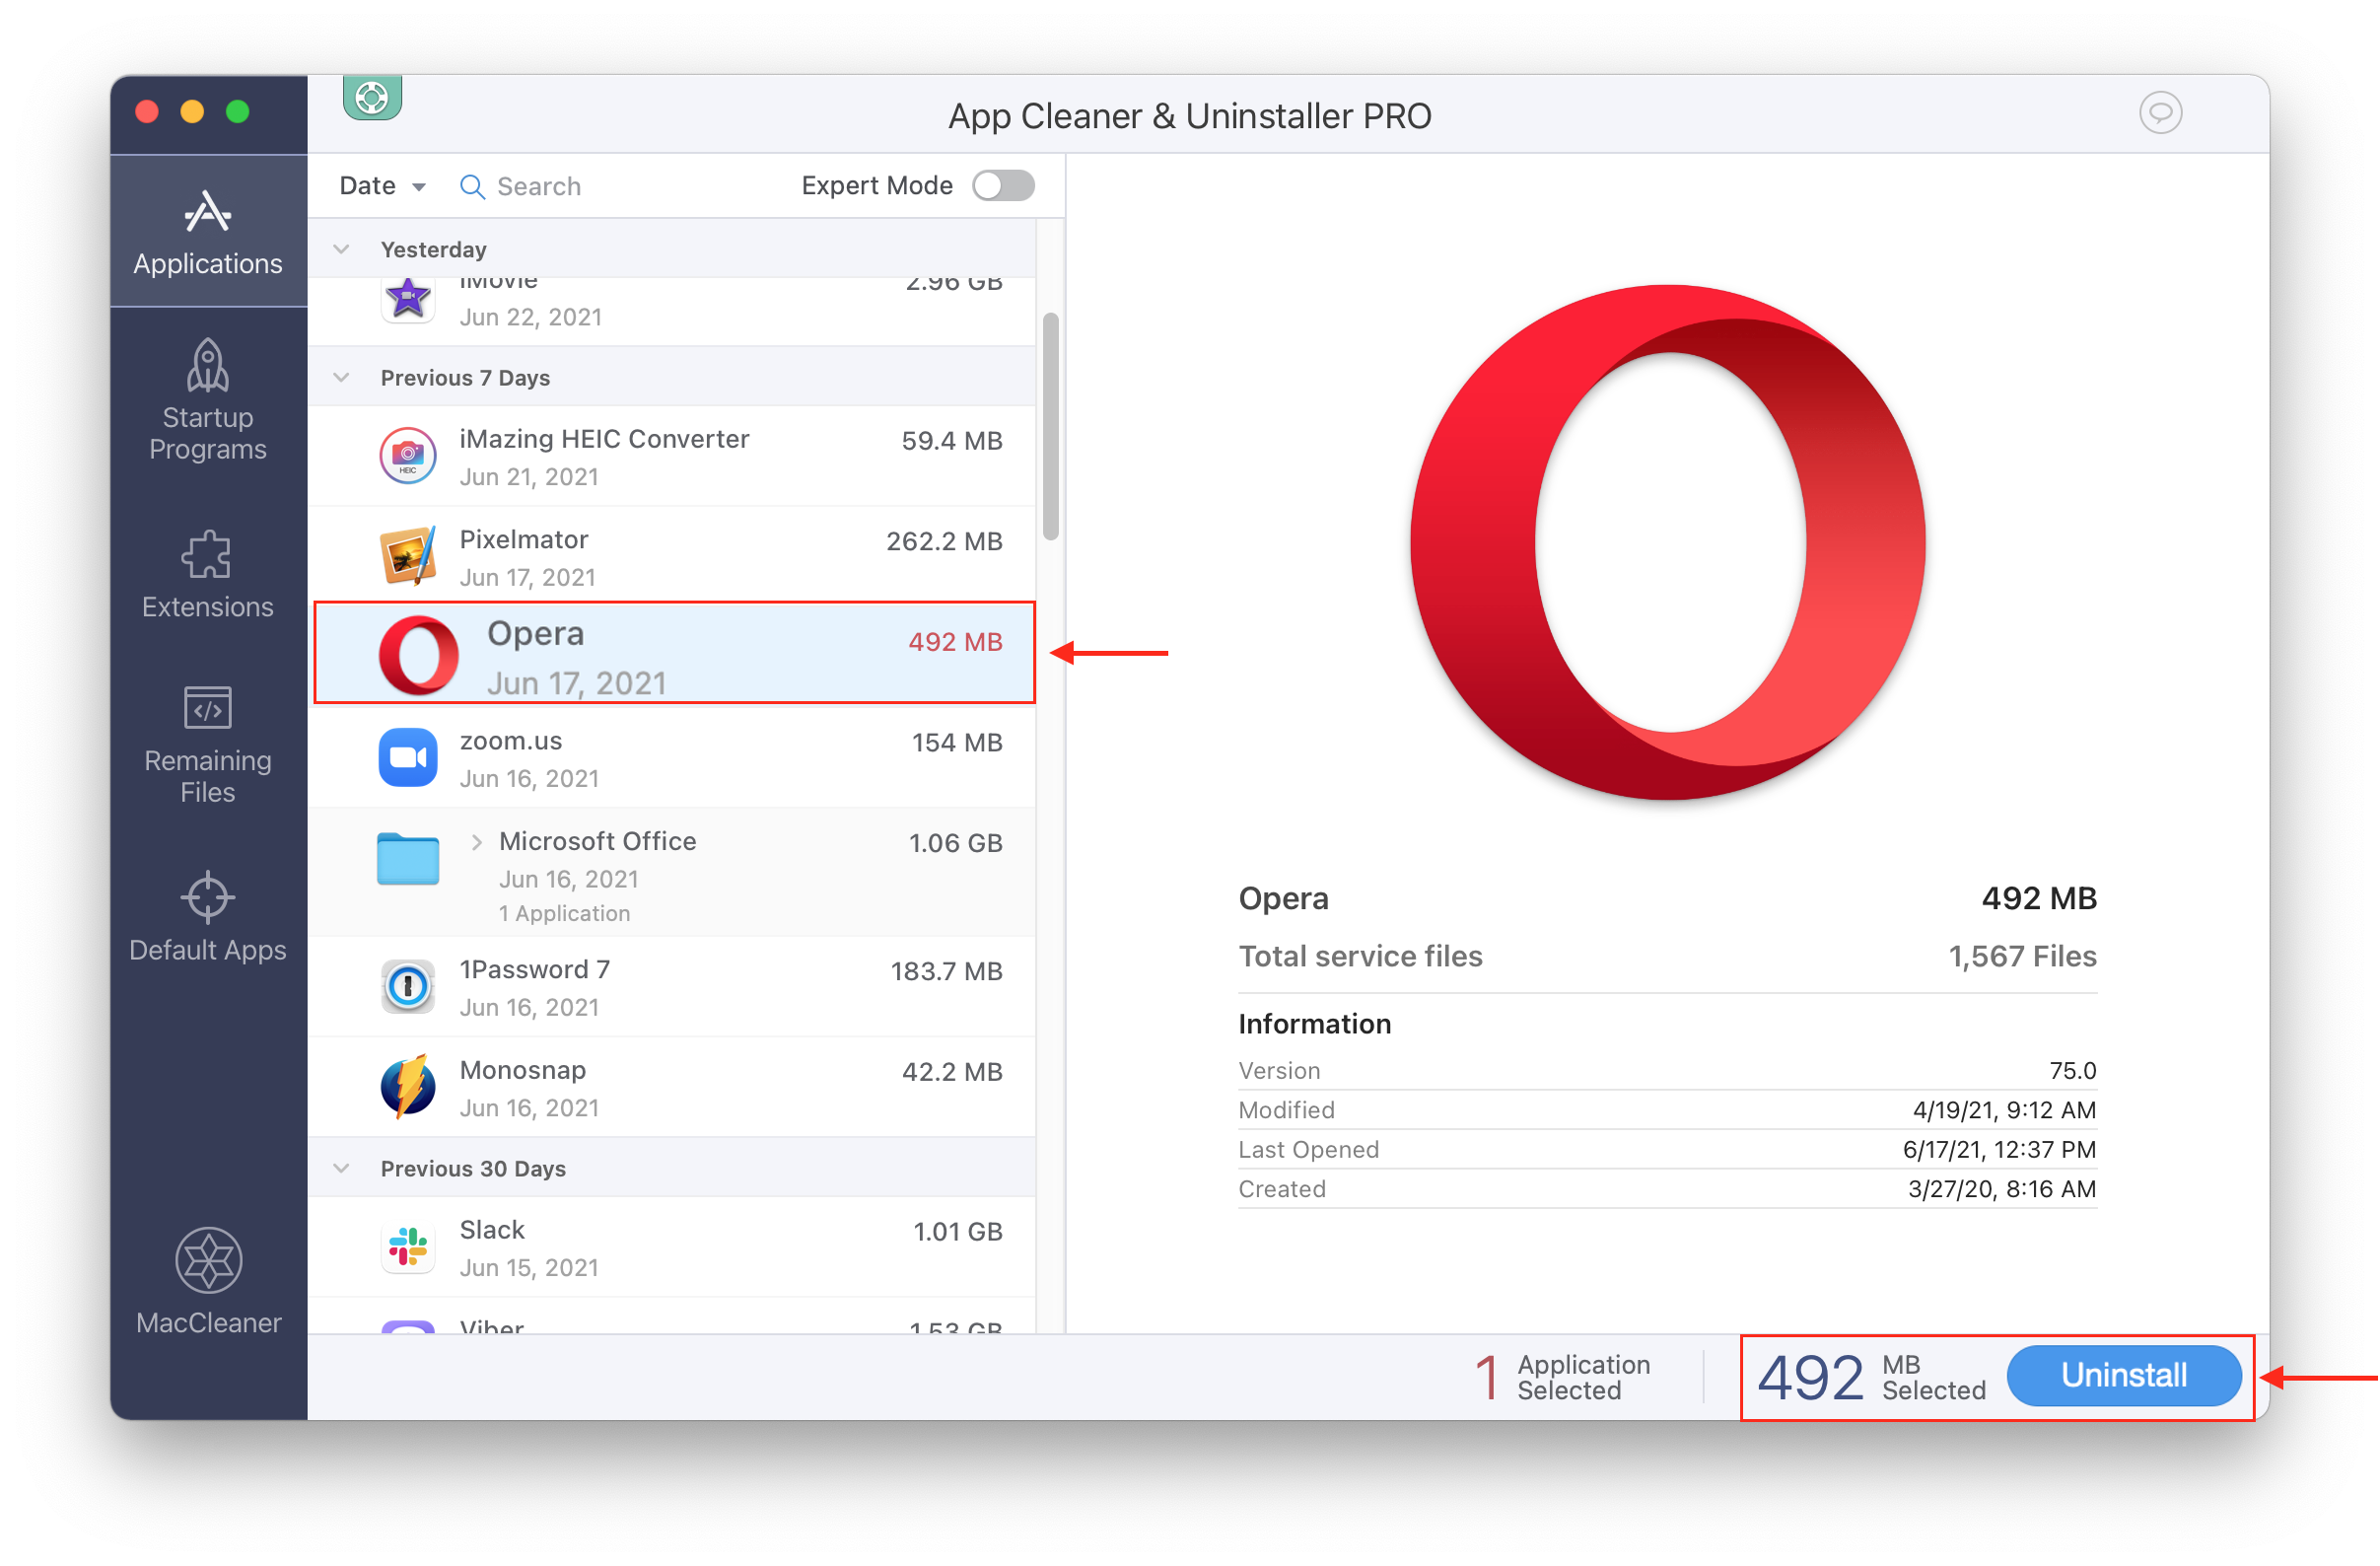 Opera selected for complete removal with App Cleaner & Uninstaller